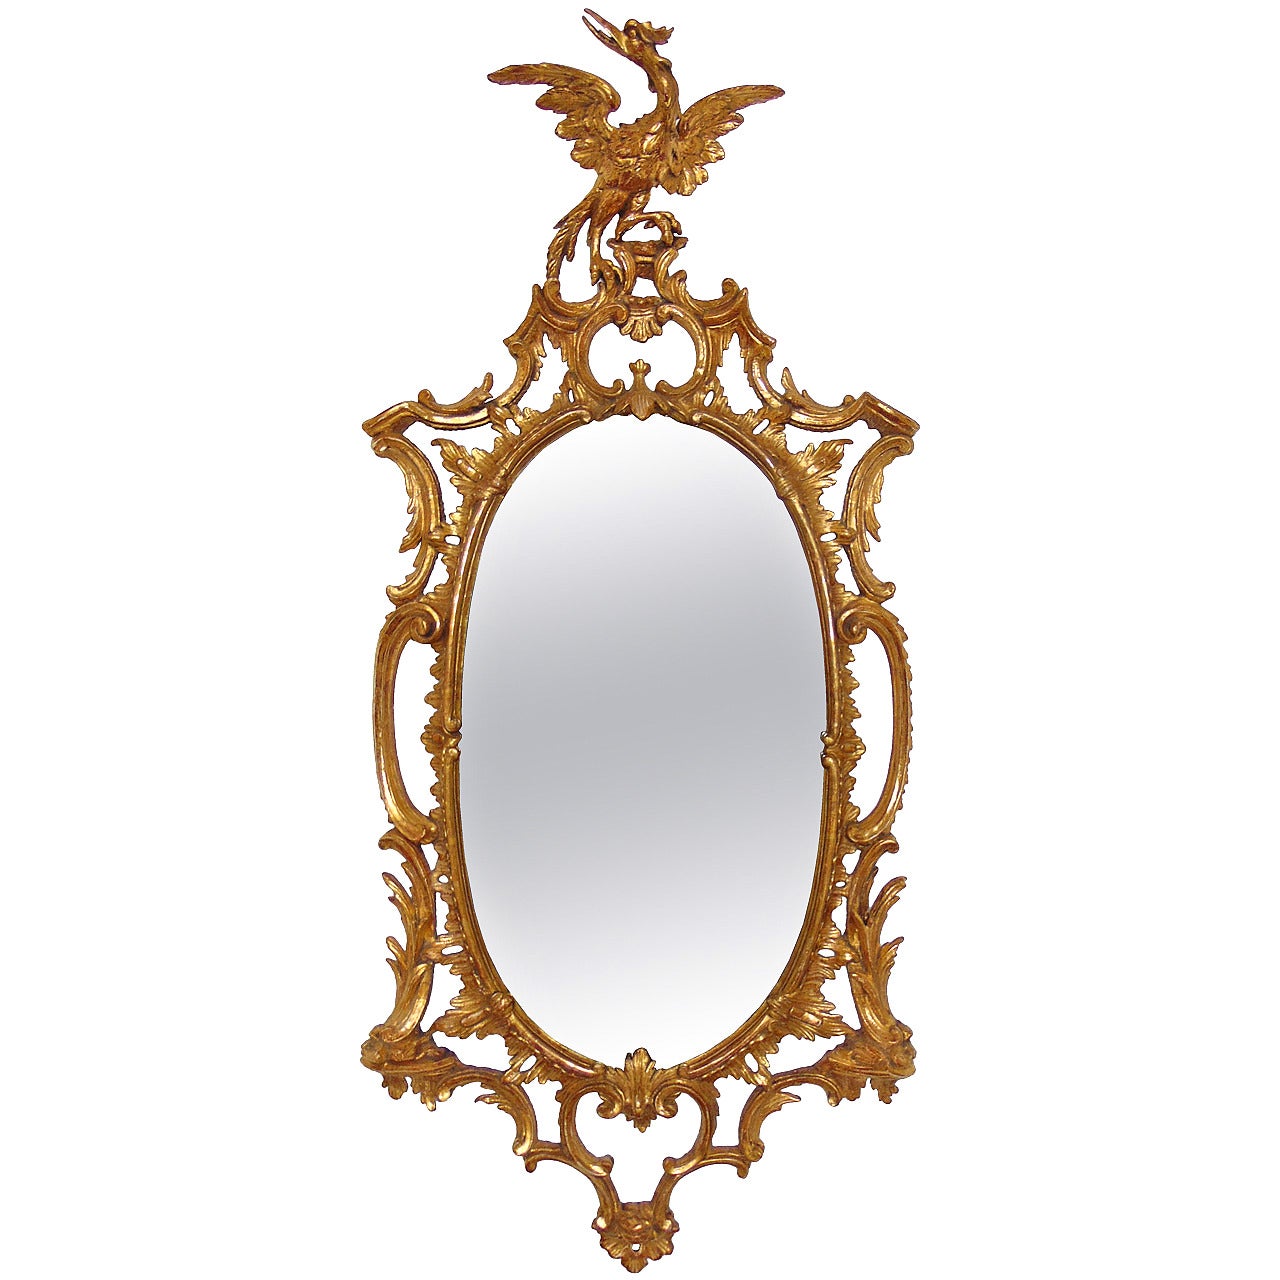 Period 18th Century Chippendale, Carved and Gilt Mirror with Ho Ho Bird